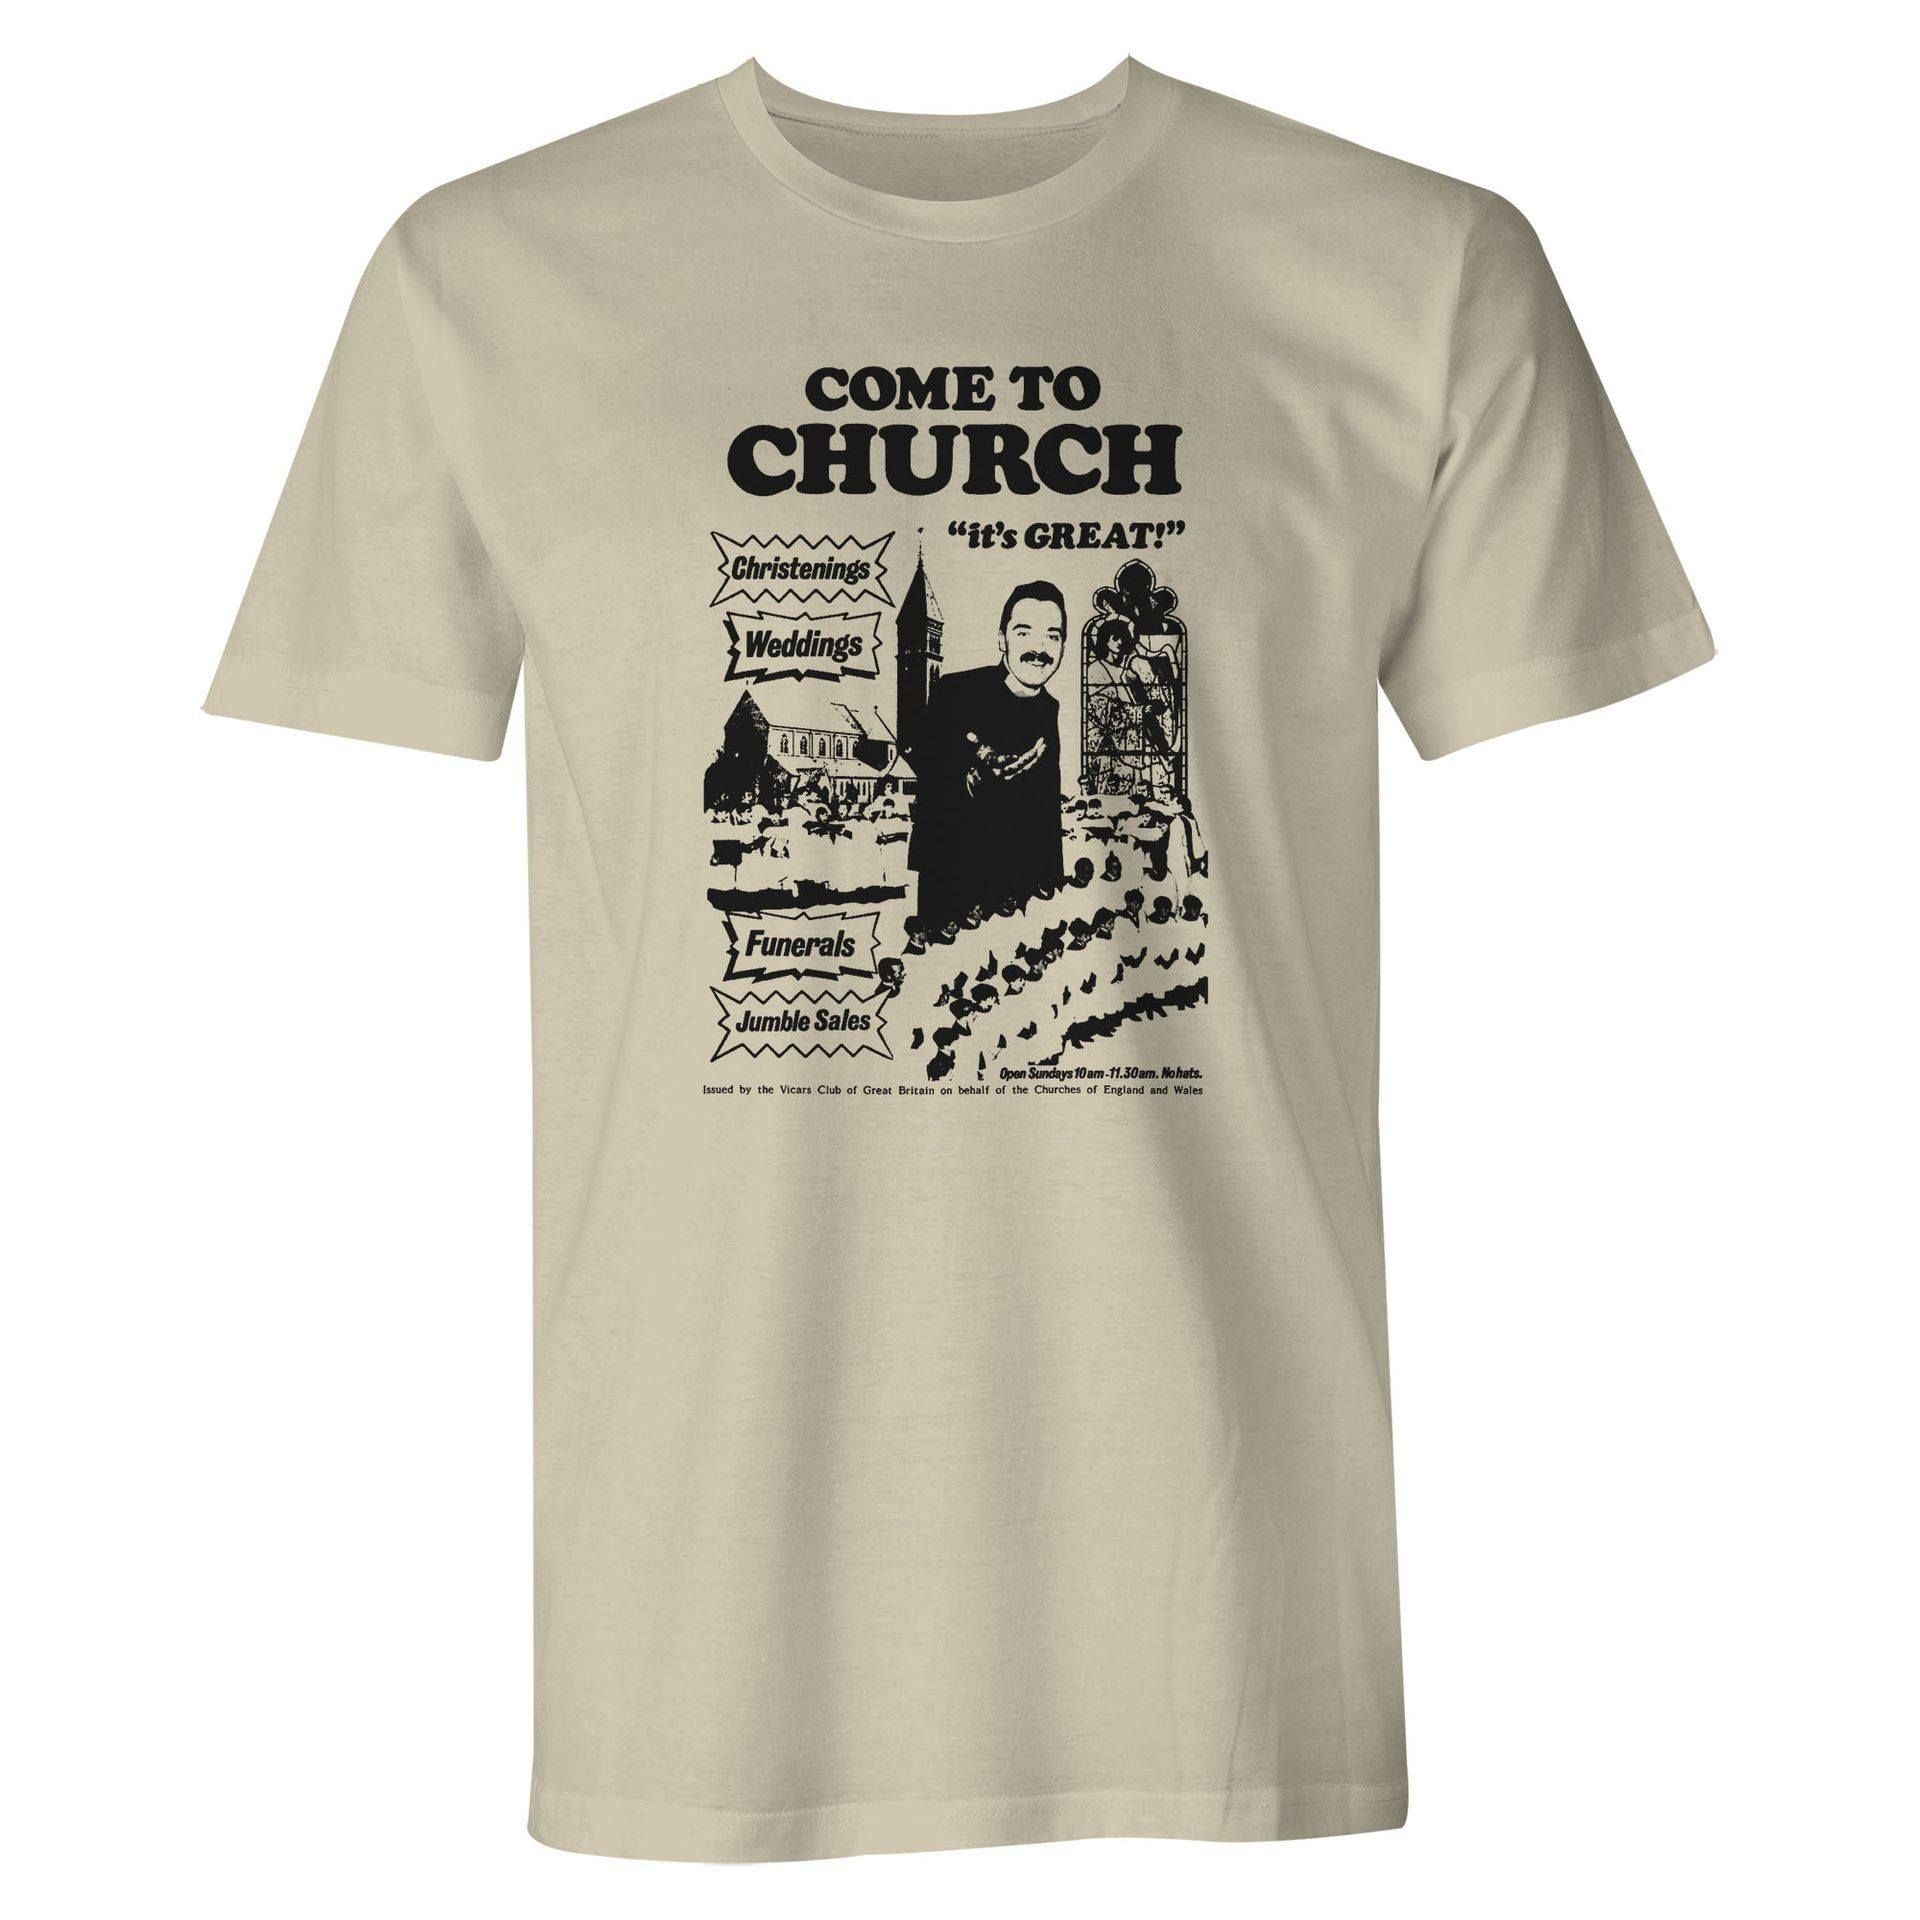 Come to church - It's great, christenings, weddings